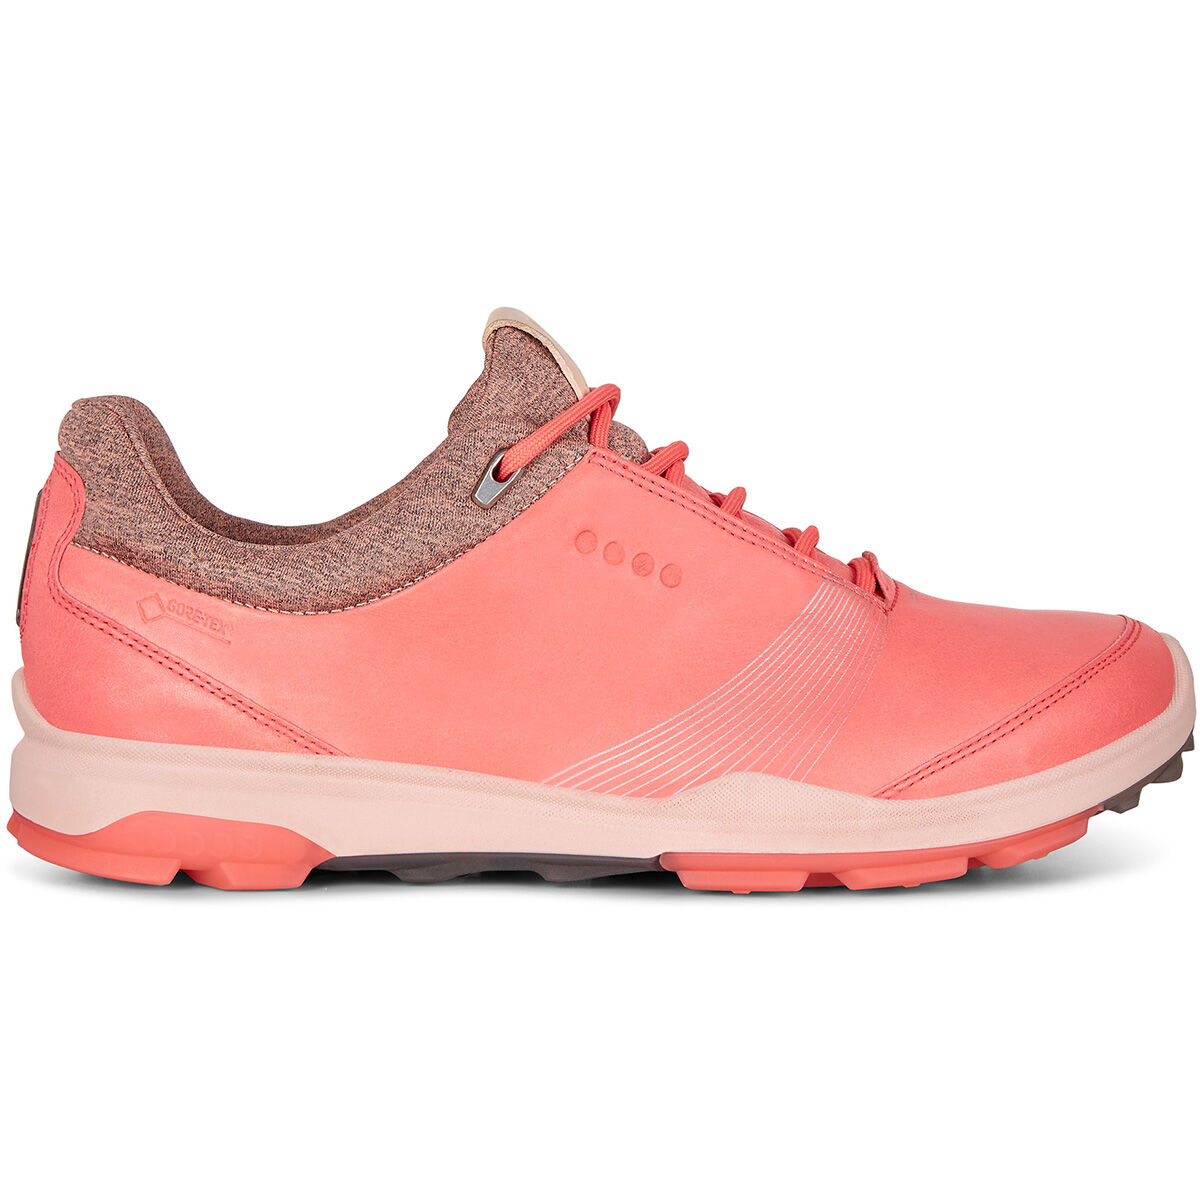 Chaussures ECCO Ladies Biom Hybrid 3 Pour Femme, femme, 2, Spiced coral, Normal | Online Golf